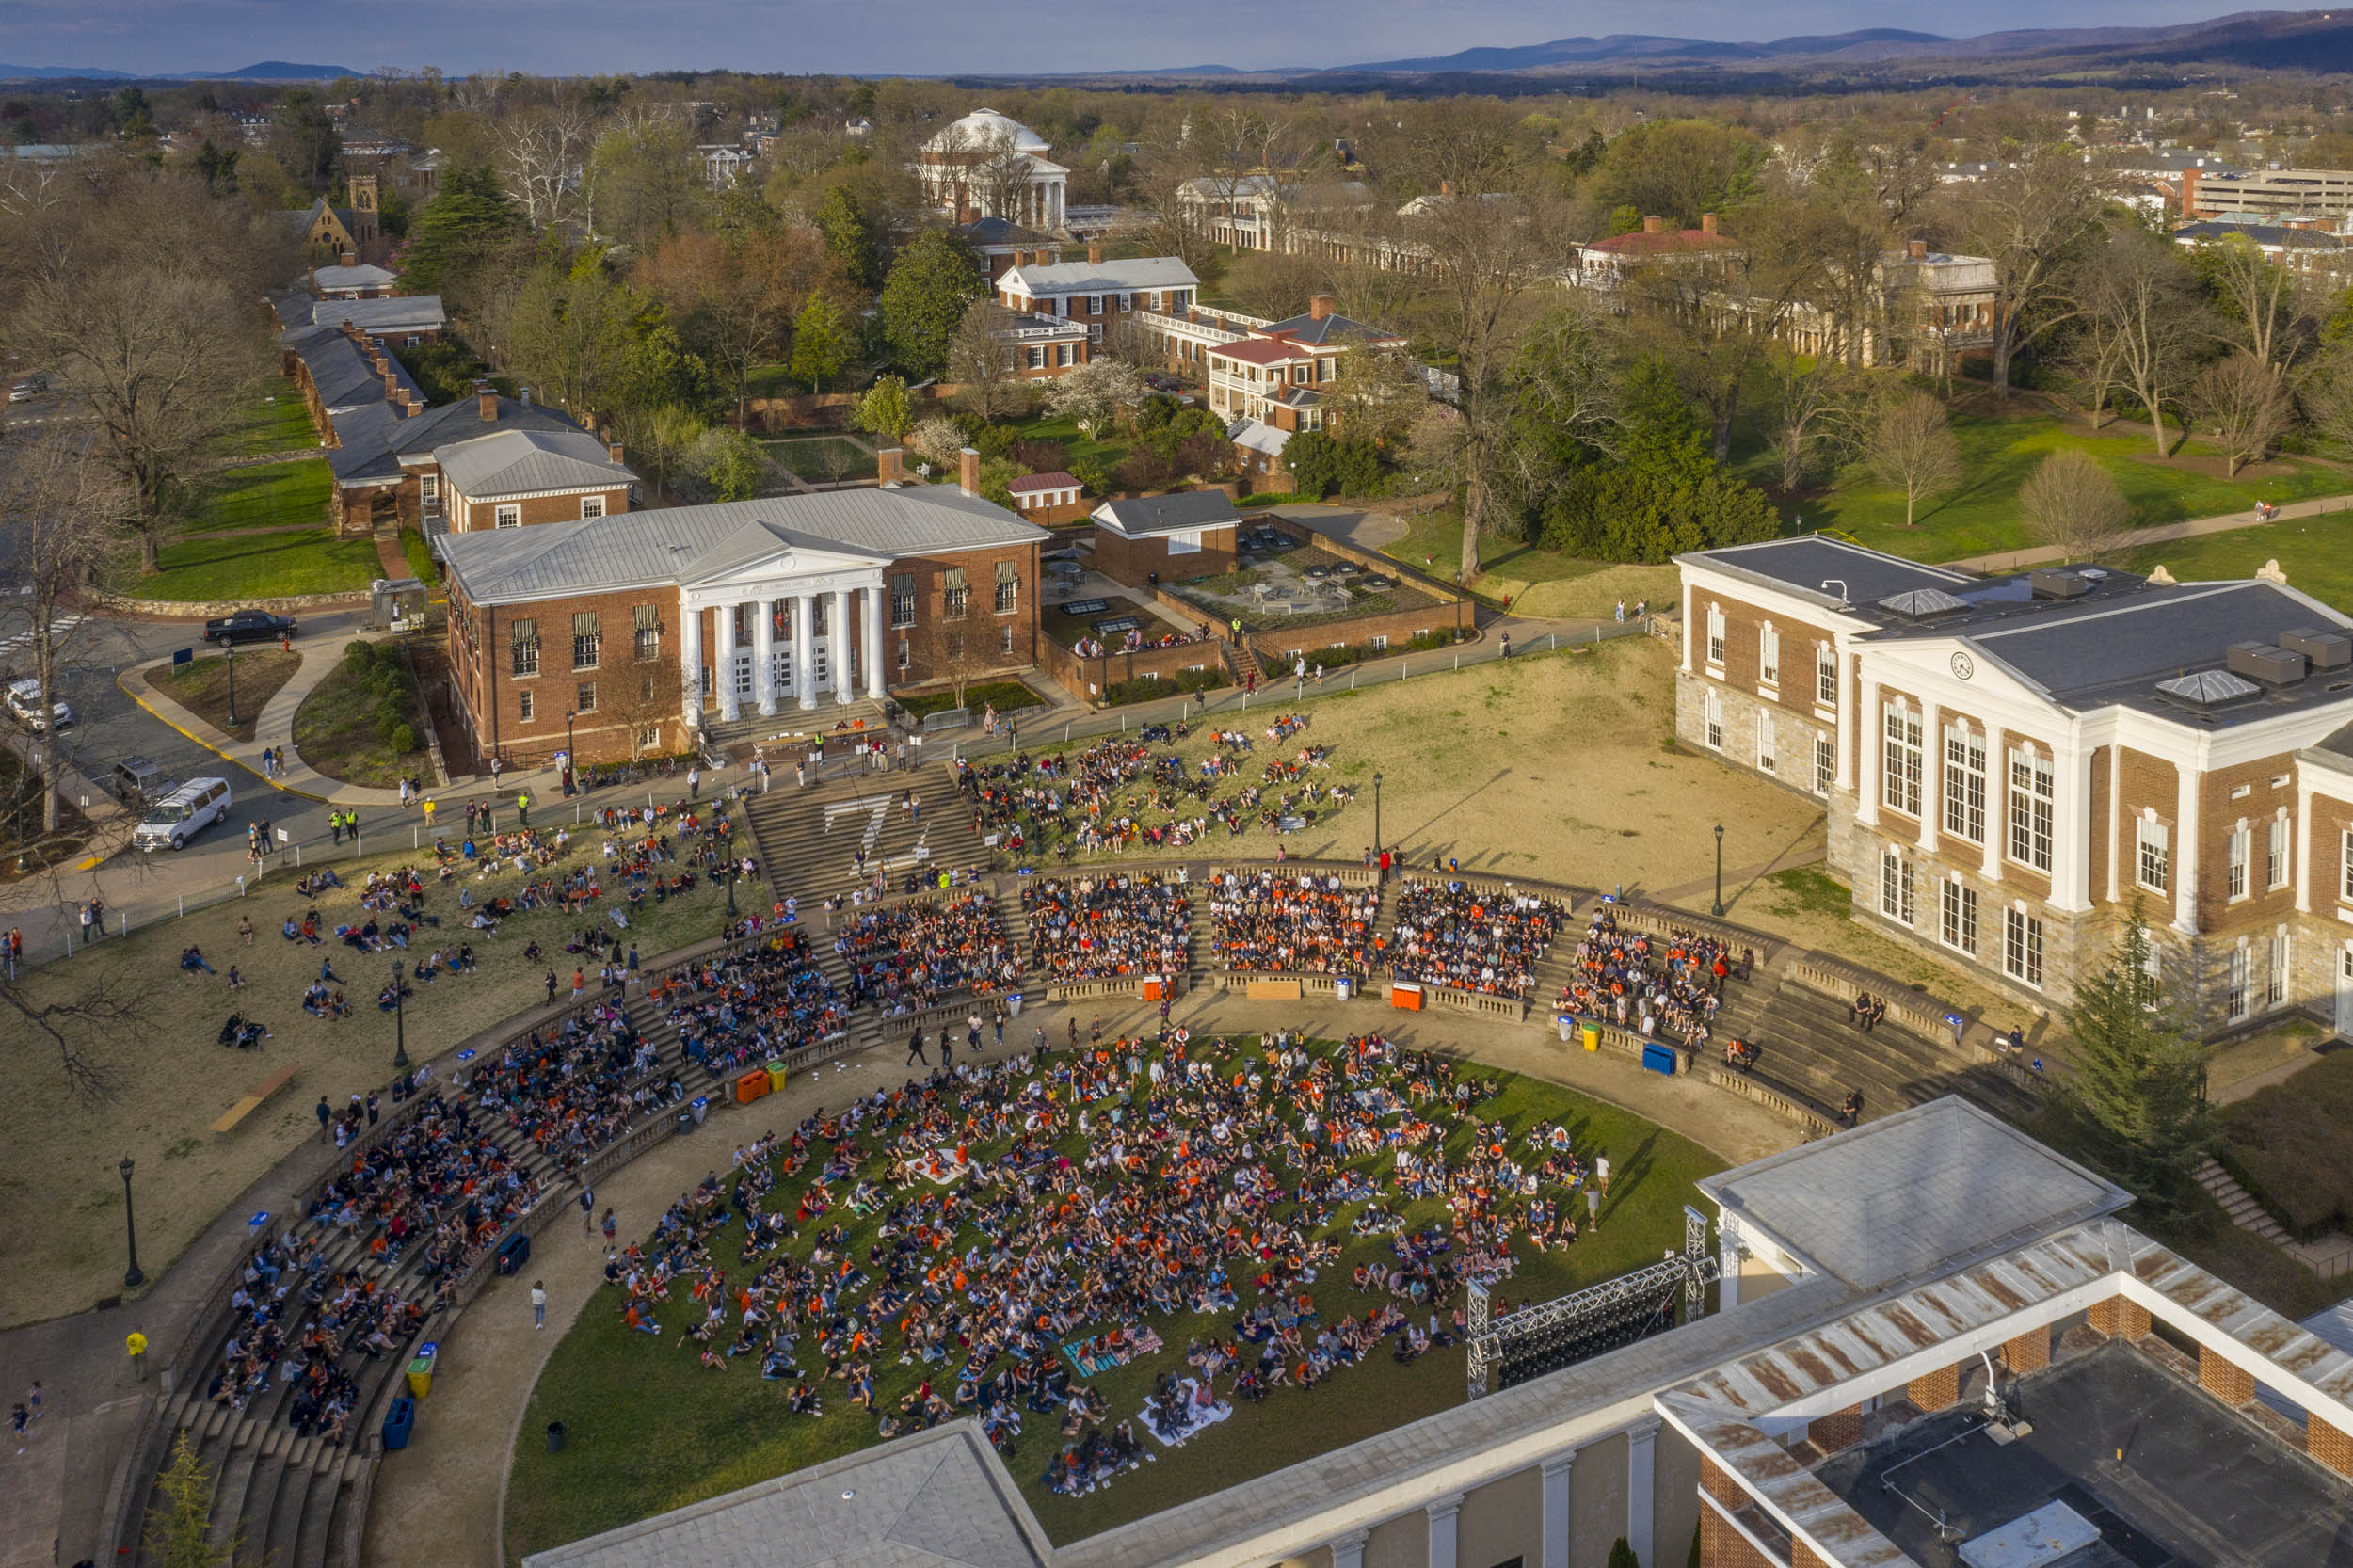 Crowd gathered in the Amphitheater to watch the Final Four 